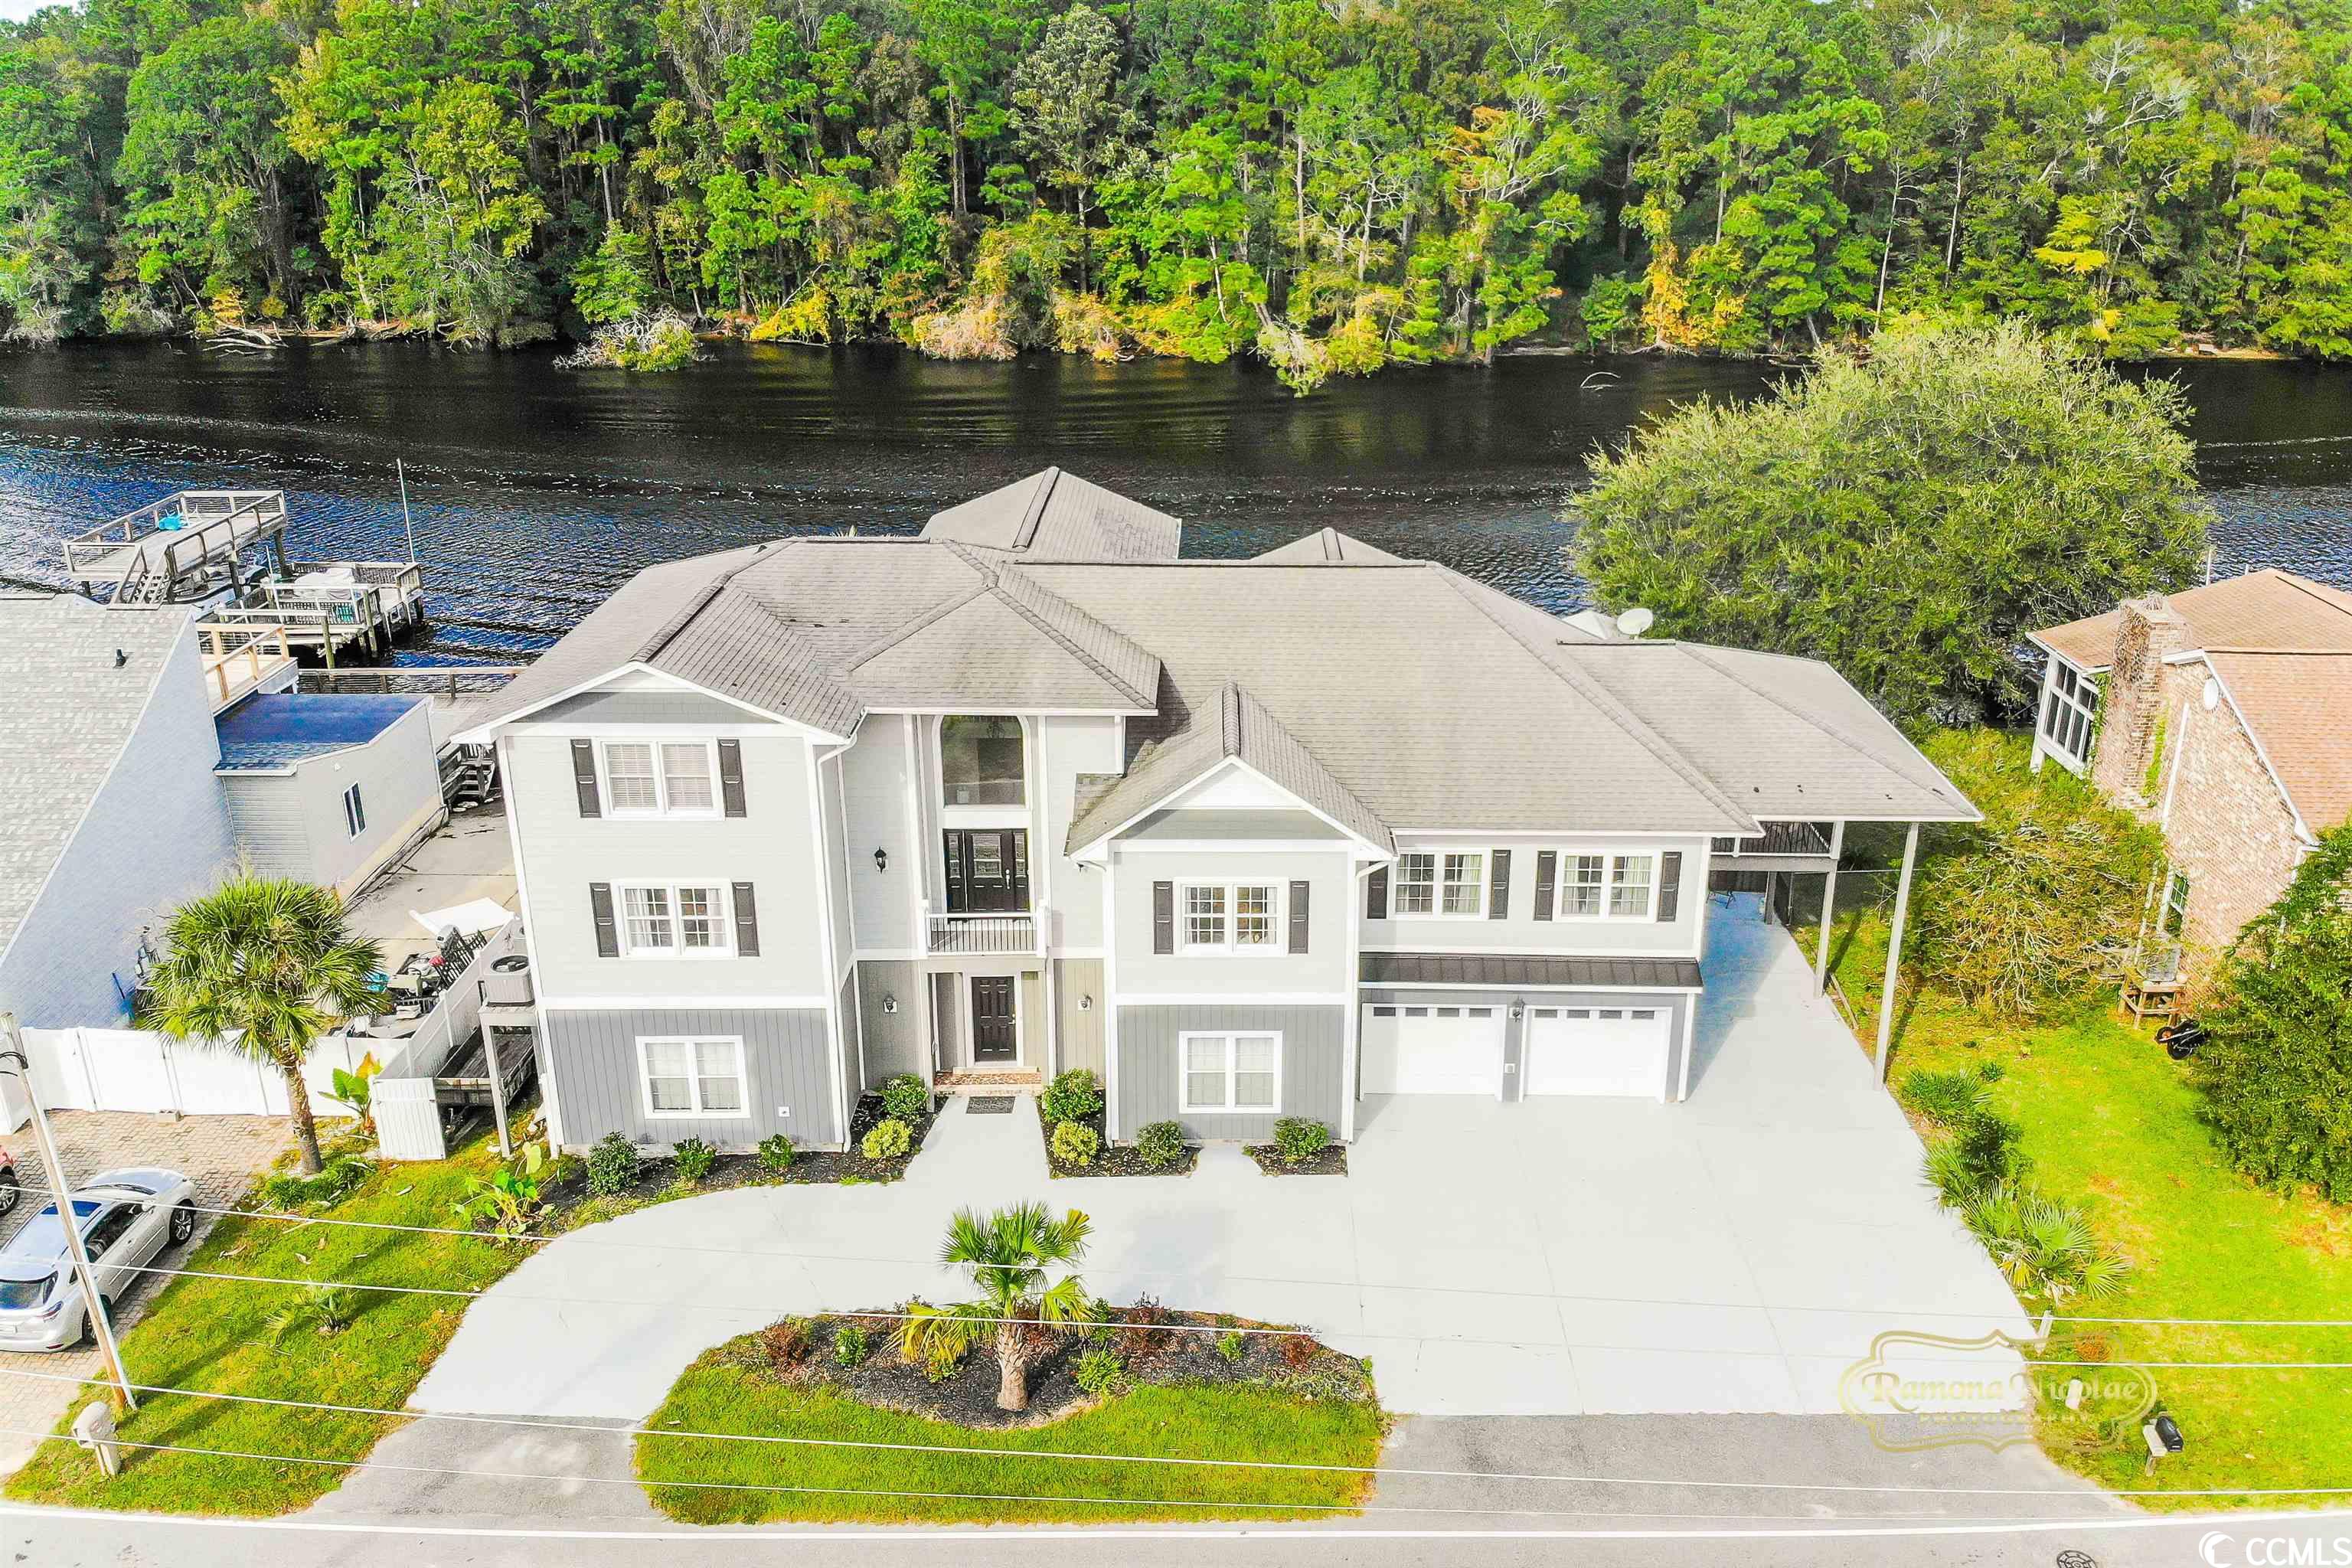 what an extraordinary home ! - direct on the intracoastal waterway.! expansive living areas & amenities!  you can make this your lifestyle home.! with all the waterway views & watching the boats go by!! plenty of activity in warm months & traveling boats in spring & fall !   approximately 4000 sq.ft.heated living space with 16x26 outside deck overlooking waterway!- just outside your kitchen and den!! steps from deck take you to back yard & also your own private boat lift with shed cover - & jetski lift for your toys! just head out to your boat or jet ski & hop on the water! this home has been extensively renovated with all modern updates! home has large den with 18ft ceilings - & ventless gas fireplace! eye-catching natural stone wall above fireplace! & waterway views.! upgraded luxury vinyl plank flooring throughout main living level & carpet &tile on second floor. spacious kitchen with breakfast nook overlooking waterway, granite counters( lots of counter space), custom cabinets - 42” upper cabinets, upgraded stainless appliances, under-cabinet lighting, 3ft x 6ft center island w/ cooktop!  plenty of storage space in kitchen - including walk-in pantry with plenty of shelving! formal dining room. all living areas flow into each other!!  on mainlevel there are 2 master suites - each of these suites has lots of closet space & the bedrooms have roomy measurements!!  the primary master suite has approximately 700sf & views of the water! 2 walk-in closets here w/ plenty of shelving & hanging space ! this master bath has double vanity, tiled walk-in shower, whirlpool tub & glass block window! the 2nd bedroom suite is extra large as well w/ bath & linen closet !also on this floor is an in-law suite/guest suite with private bath & kitchenette & separate entrance!! there’s even your own private deck( 13x14 )overlooking the waterway! on 2nd floor living level there are 2 additional large bedrooms w/ large jack & jill bath connecting these 2 rooms! also there is walk-thru connecting closet between rooms & extra closet in each bedroom. waterway views from one br ! access these bedrooms from staircase in open space w/18ft ceiling or your interior elevator (measures 3.5x4). elevator goes from ground level to both living area levels! on 2nd floor living level is the 1st multi-usespace - game room/office/exercise room/craft room-your choice! this area has 3 walk-in attic storage areas! vinyl plank flooring in this room! connects to the 2 bedrooms on this floor by bridge in area that overlooks den!  rounding out the first floor living level is laundry room w/custom cabinets/granite & built in platform for front load w/d! utility sink & plenty of room here for doing laundry w/ water view! next to laundry room is 1/2 bath & elevator! you access the guest/inlaw suite directly from elevator using private lock-out door to suite door! ground level is approximately 2300sf - unfinished space but heated & cooled!! this space can be multi-use as well. exercise area, craft area, man cave, extra-huge storage area! there’s an extra w/d hookup if you want to do laundry here for outside/cleaning items! a 1/2 bath is here/conveniently located  for downstairs area. you can park in your attached 2car garage - bring in purchases & take elevator up to 2nd & 3rd levels! outside there is ample parking with additional carport & driveway.  head out to water for dock directly on water-enjoy sitting here to watch activities on water or the beautiful sunsets on the waterway!!  located only minutes to market common area & a few miles to the beach ! what an opportunity for your primary, 2nd home or as a shared retreat !  measures & info approximate-buyer responsible to verify. sellers are licensed sc agents.